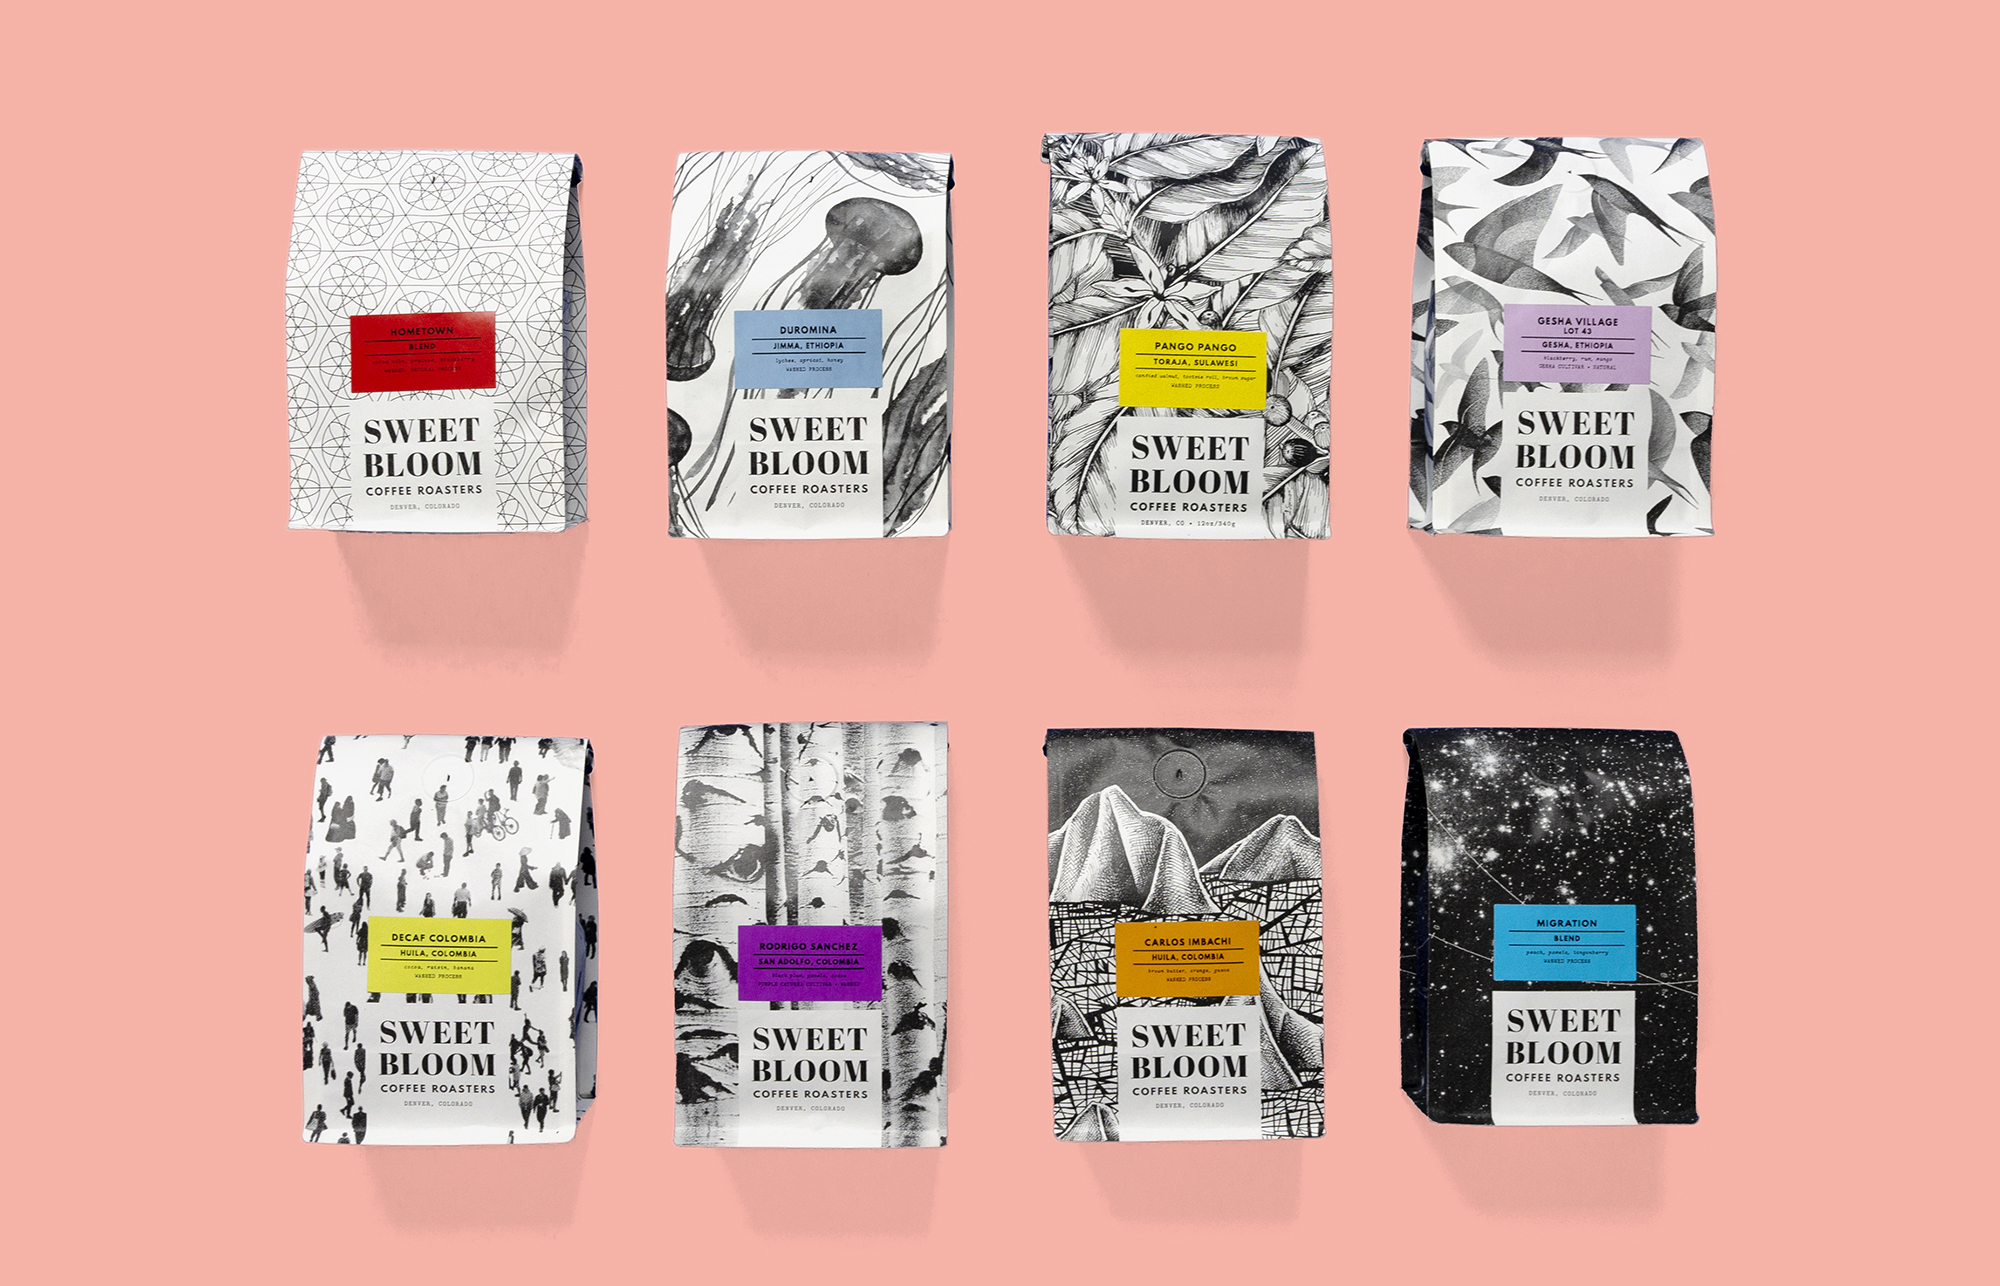 The Made Shop Redesign of Sweet Bloom Coffee Roasters Packaging